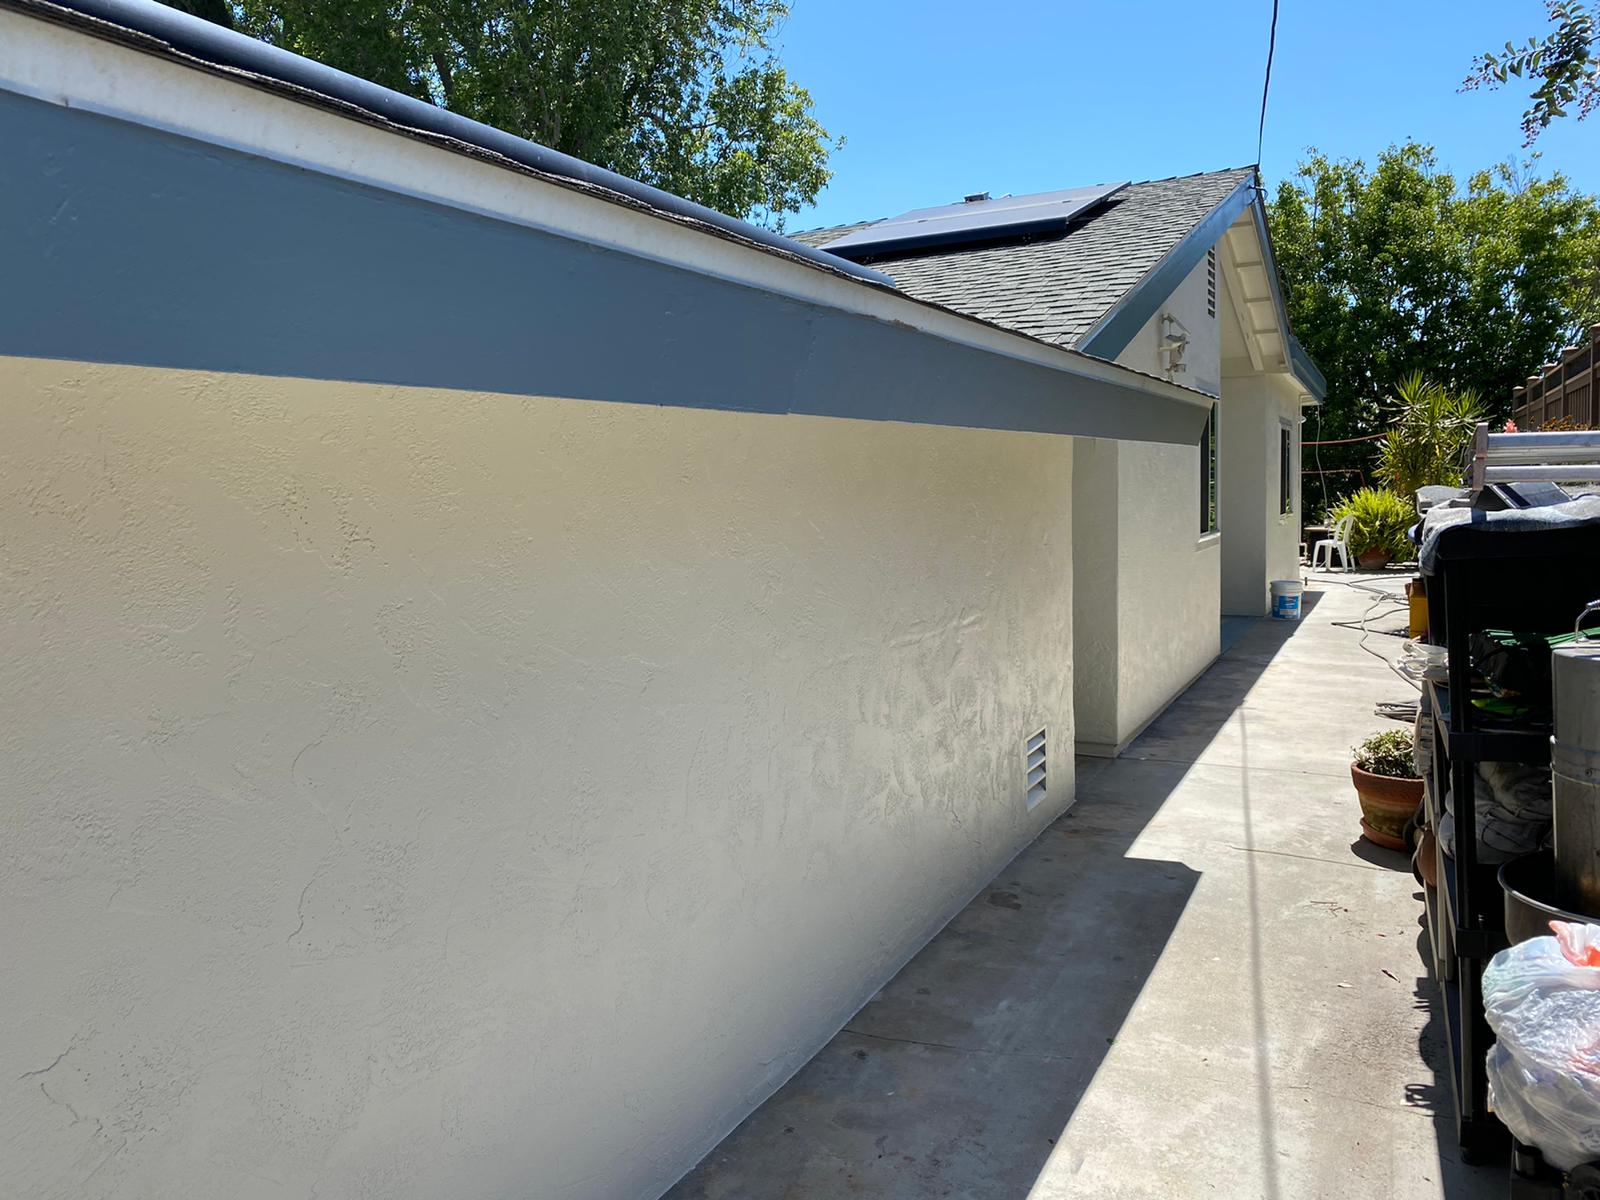 House Painting in La Mesa 91942